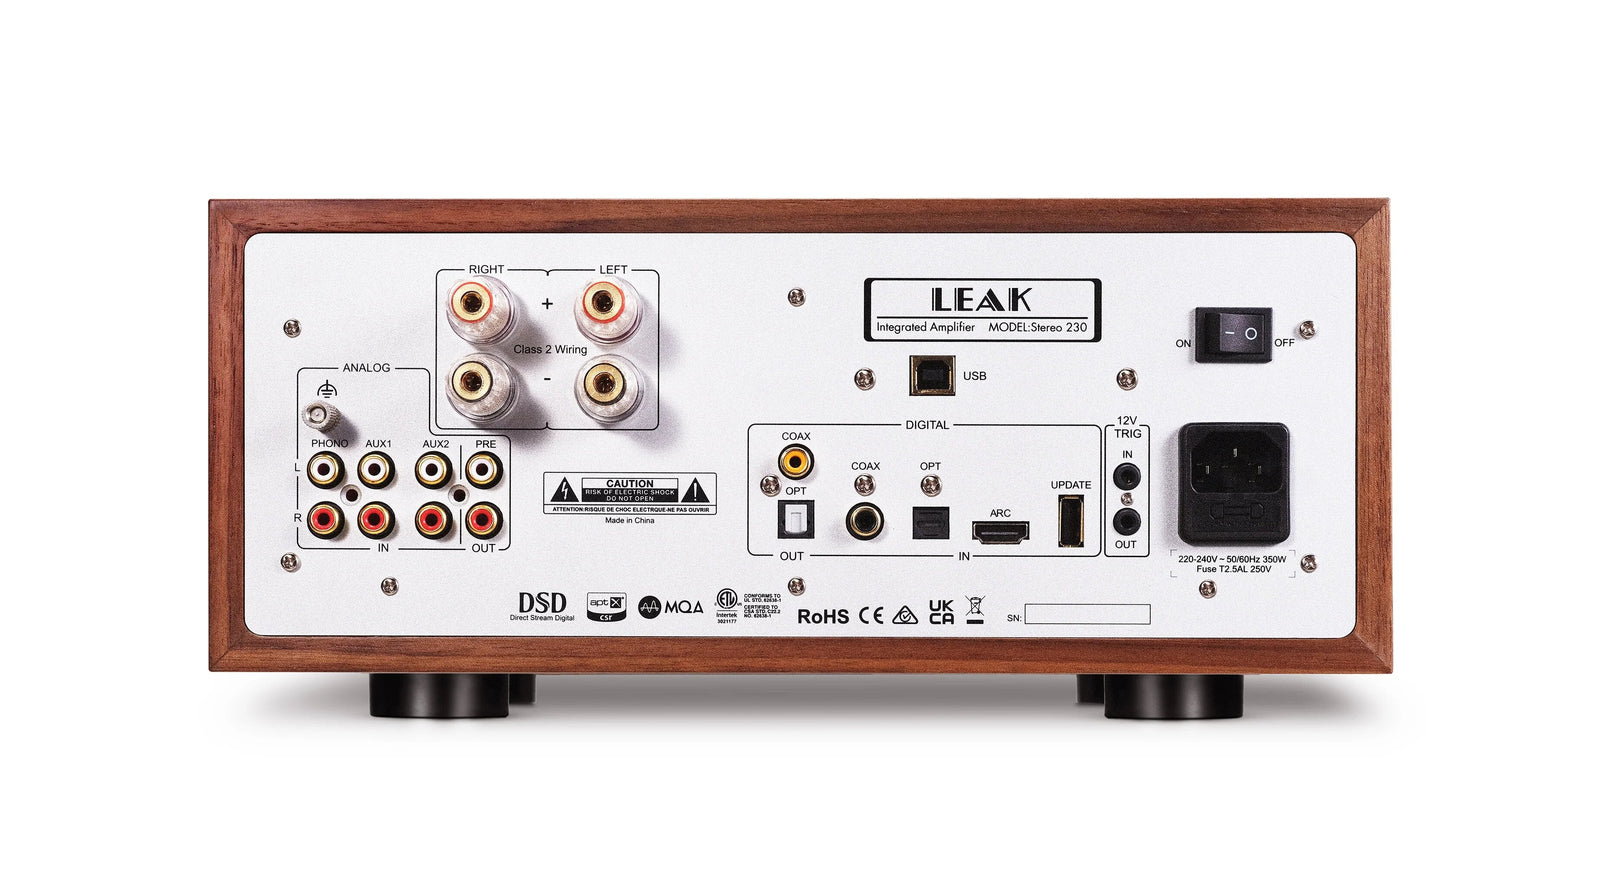 Leak Stereo 230 Integrated Amplifier is a top-of-the-line integrated amplifier that delivers high-performance sound and style. Level up your music experience with LEAK Audio. Get all the best Deal for an high performance and high-fidelity integrated amplifier, for CD Transport, amplifier, Amplifiers, Preamplifiers, Integrated Amplifiers, Power Amplifiers... 